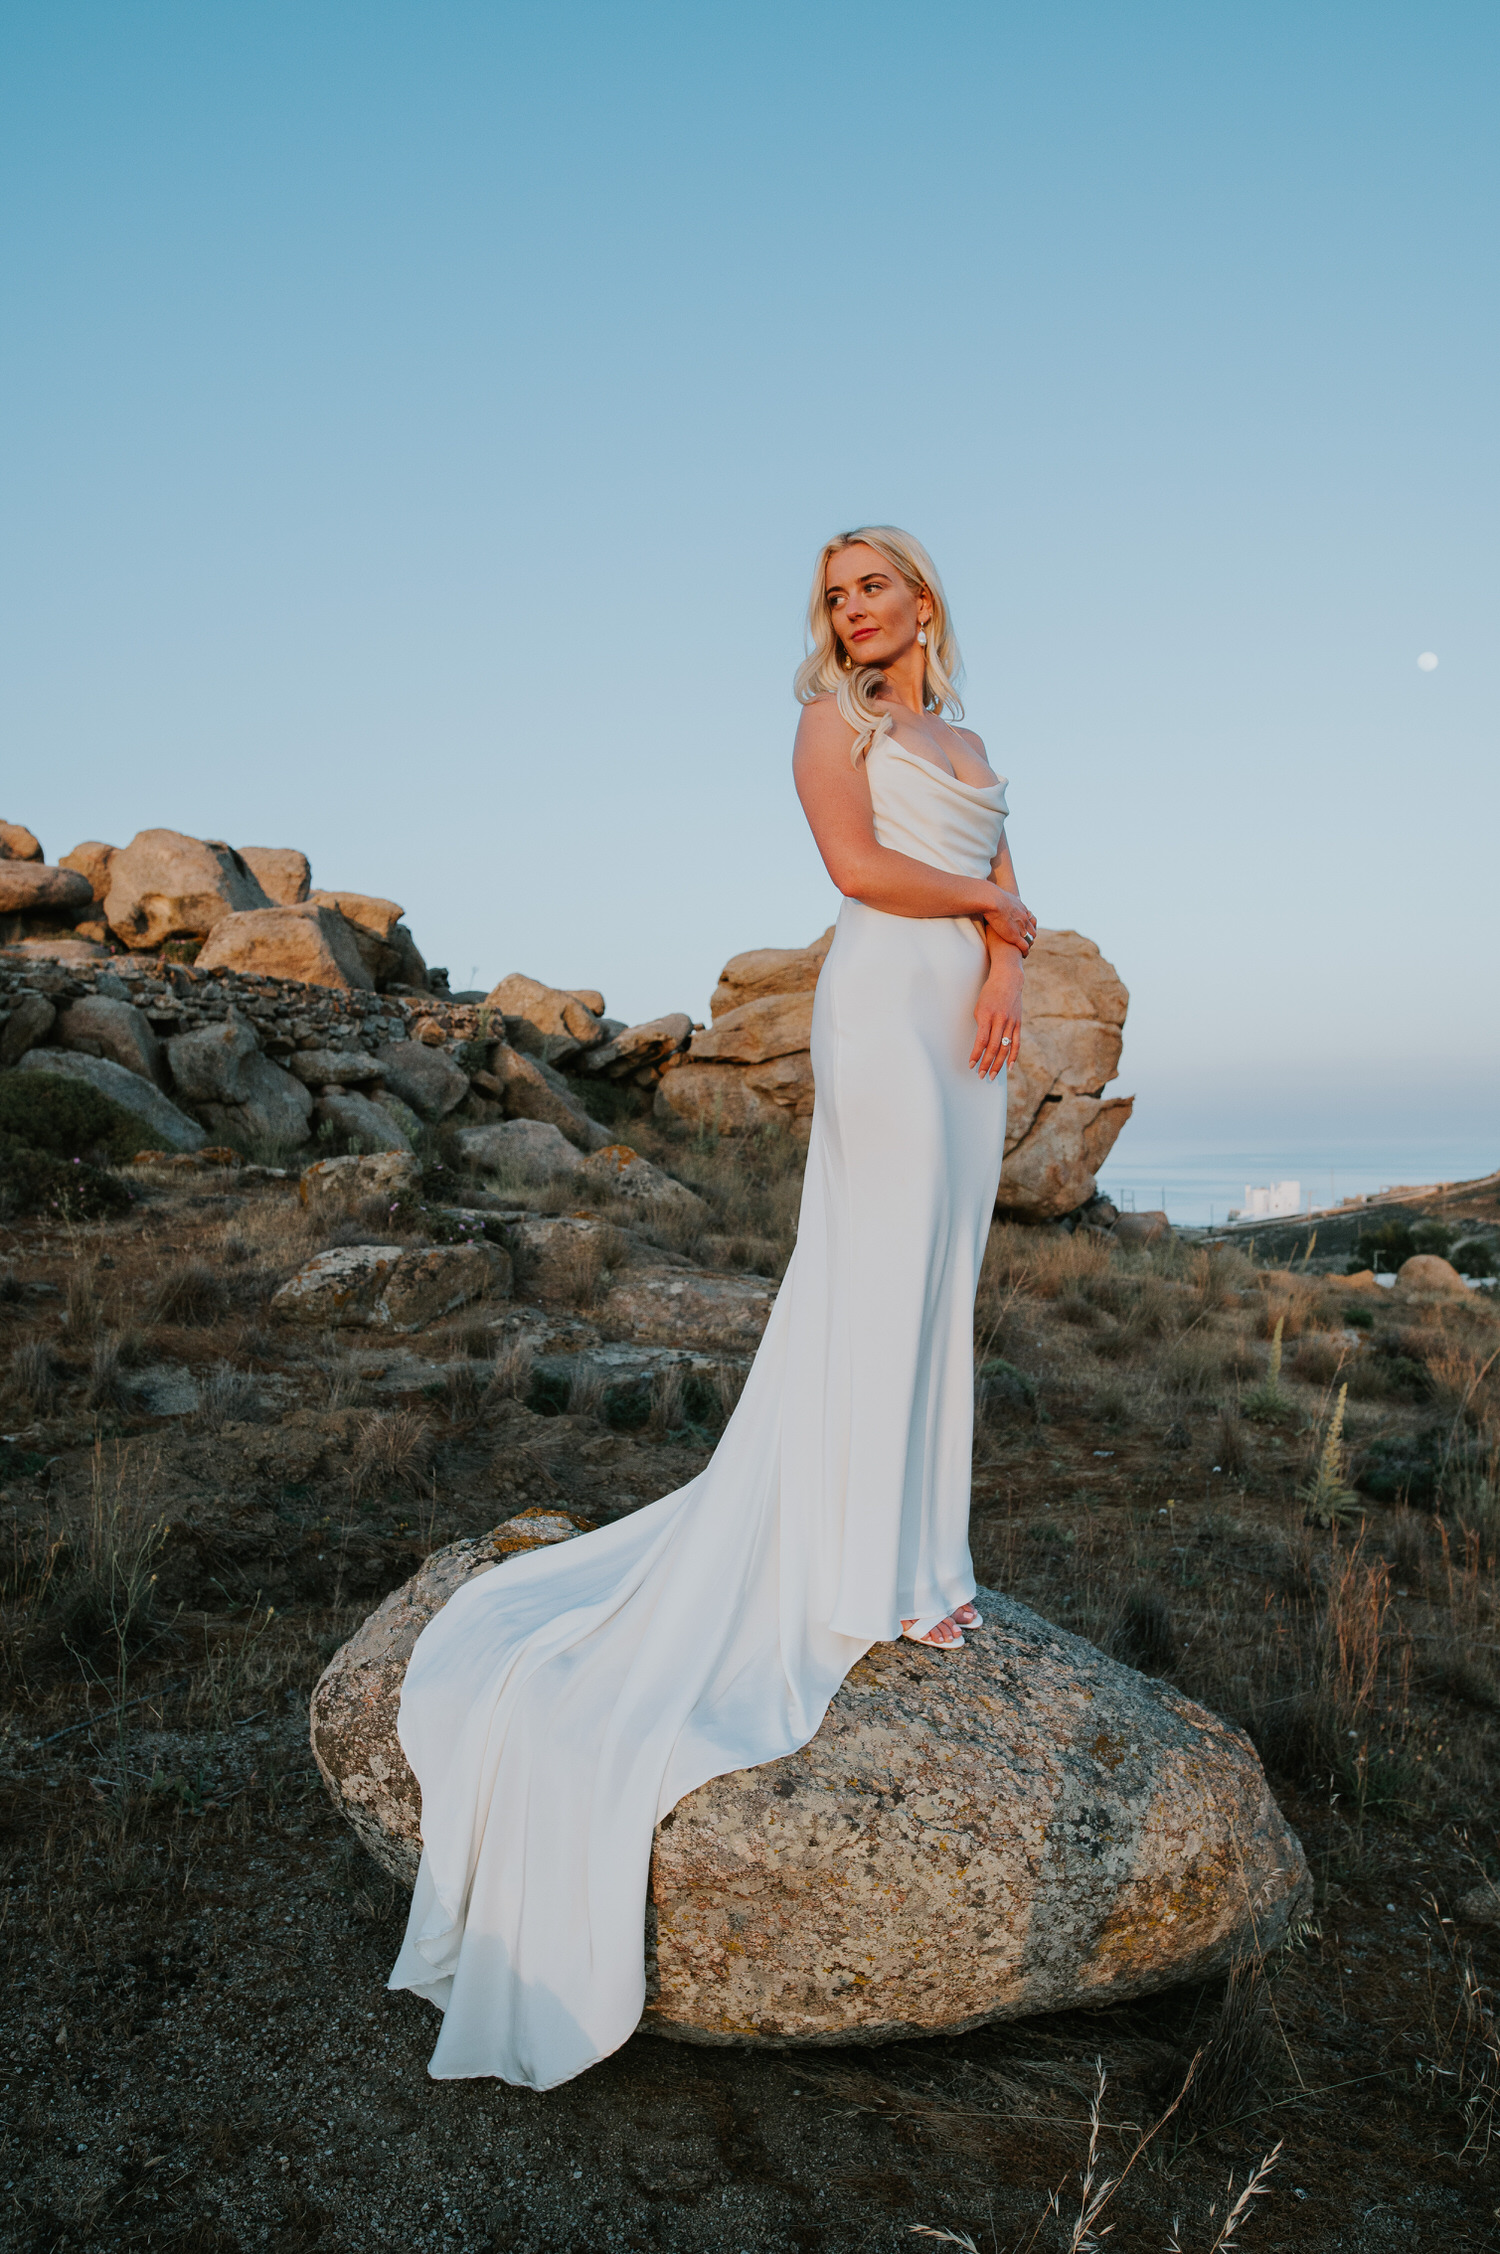 Mykonos wedding photographer: bride standing in her beautiful dress on the rock looking away in the landscape with the moon in the background.